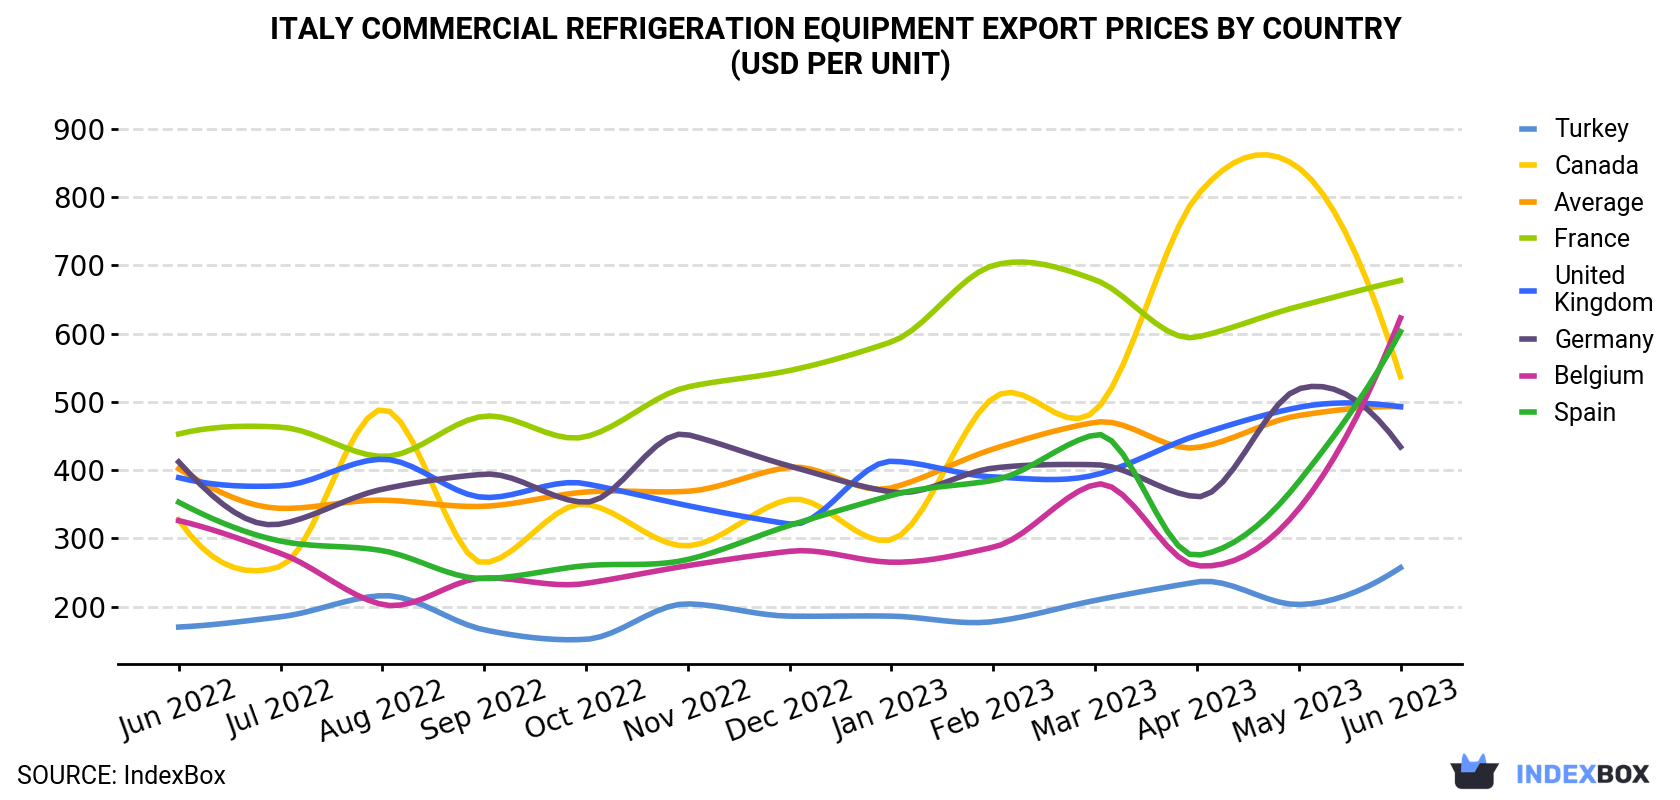 Italy Commercial Refrigeration Equipment Export Prices By Country (USD Per Unit)